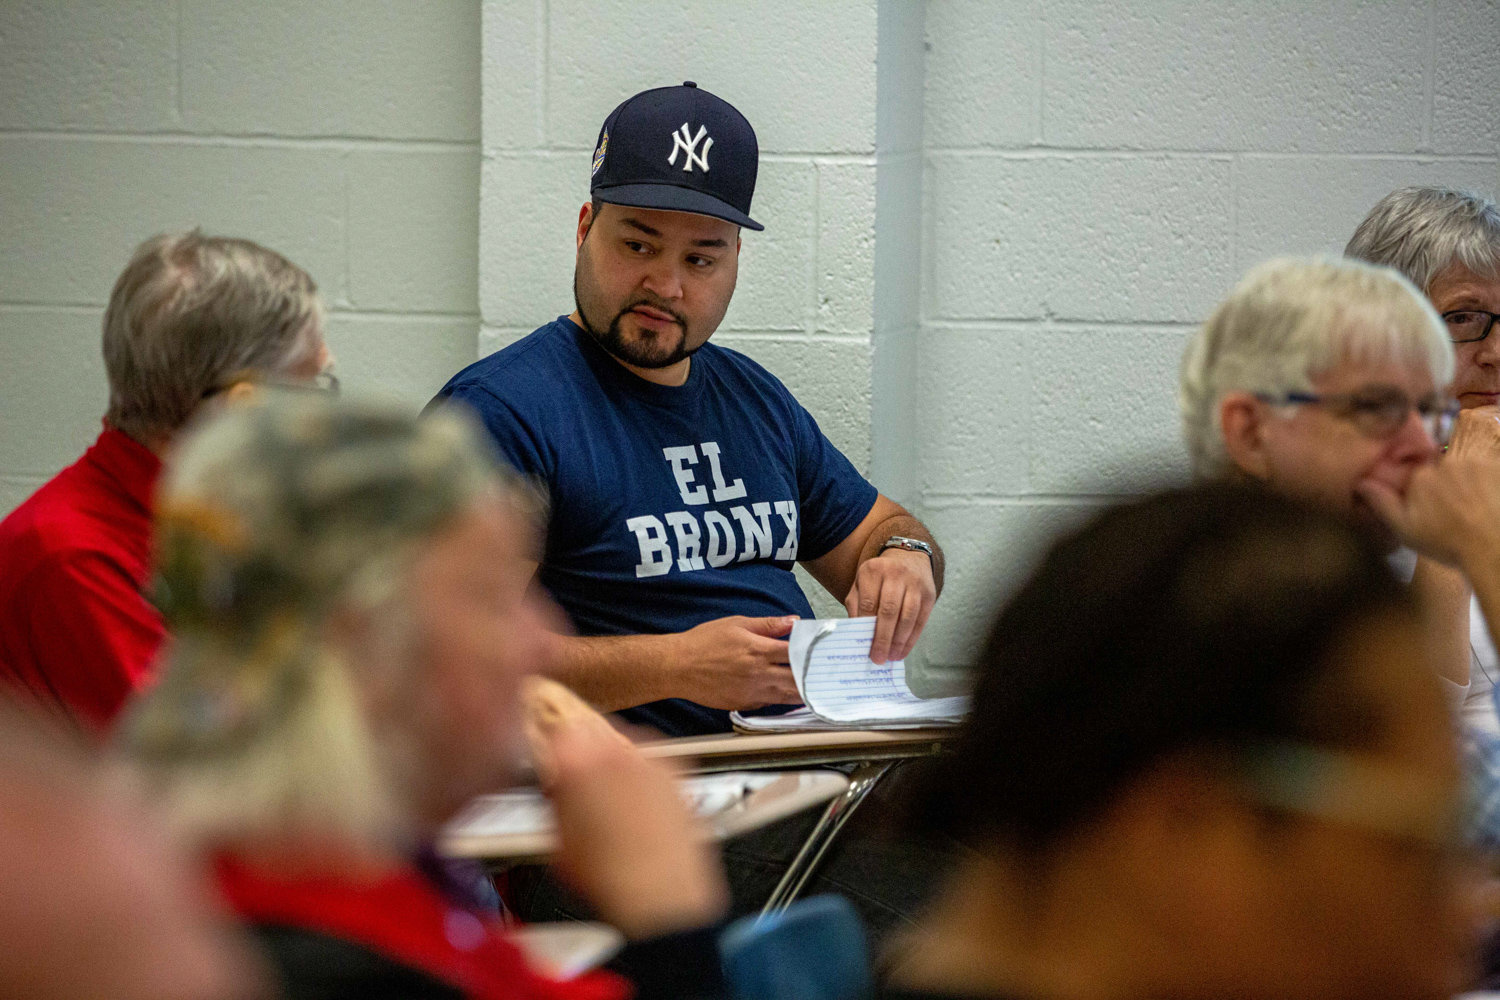 George Diaz Jr., a Norwood resident and member of Bronx Progressives, has made it a point to attend as many community events as possible as part of his campaign to unseat Assemblyman Jeffrey Dinowitz.